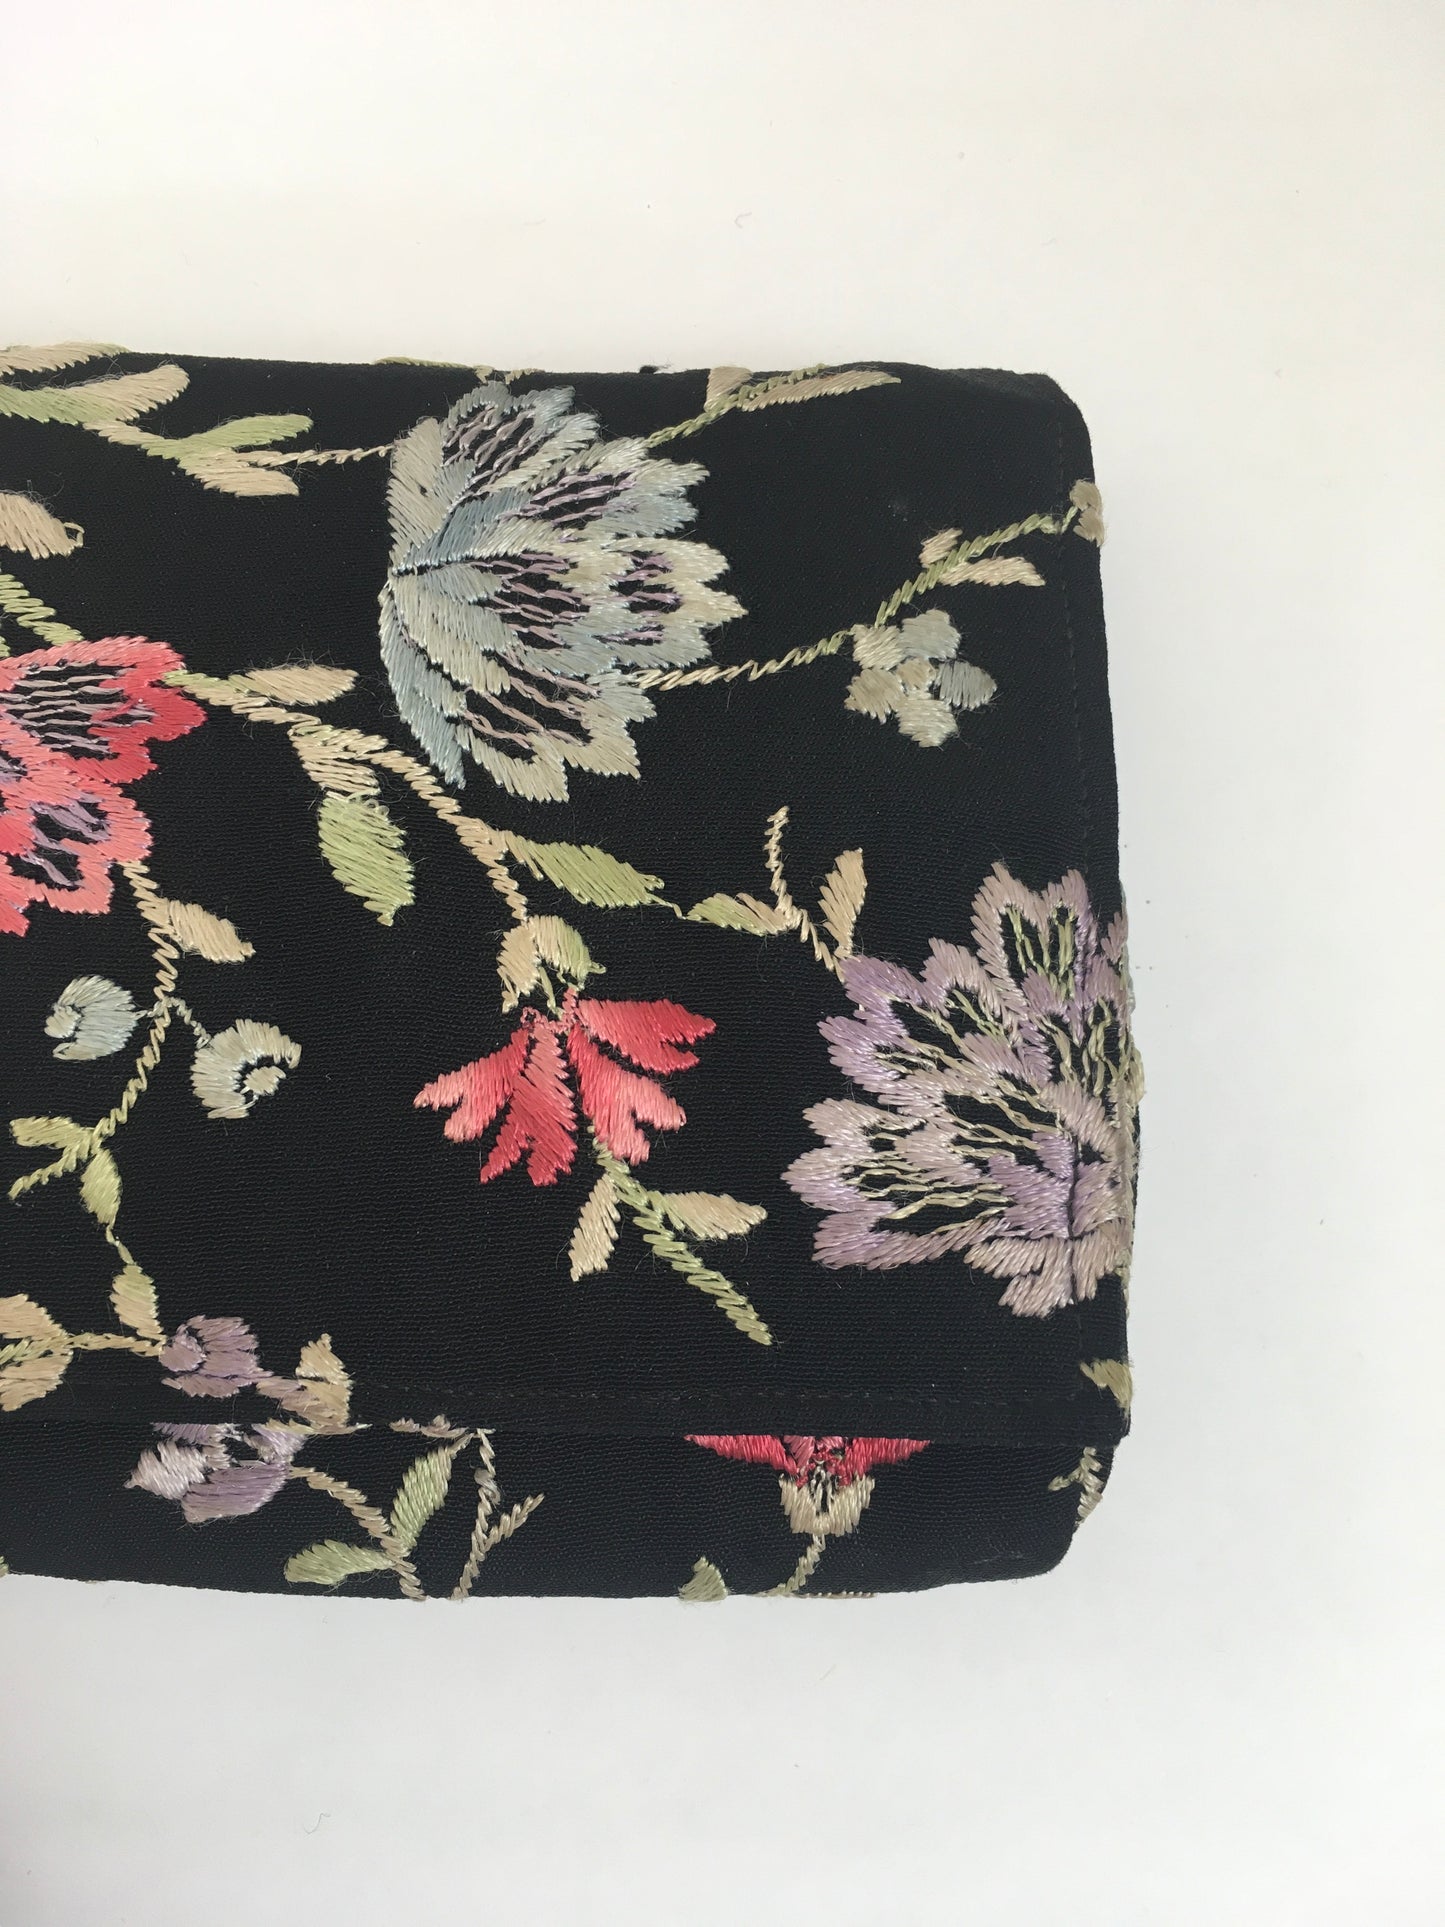 Original 1930's Exquisite Embroidered Crepe Clutch Handbag - In Black with Lilacs, Pinks, Pale Blues and Green